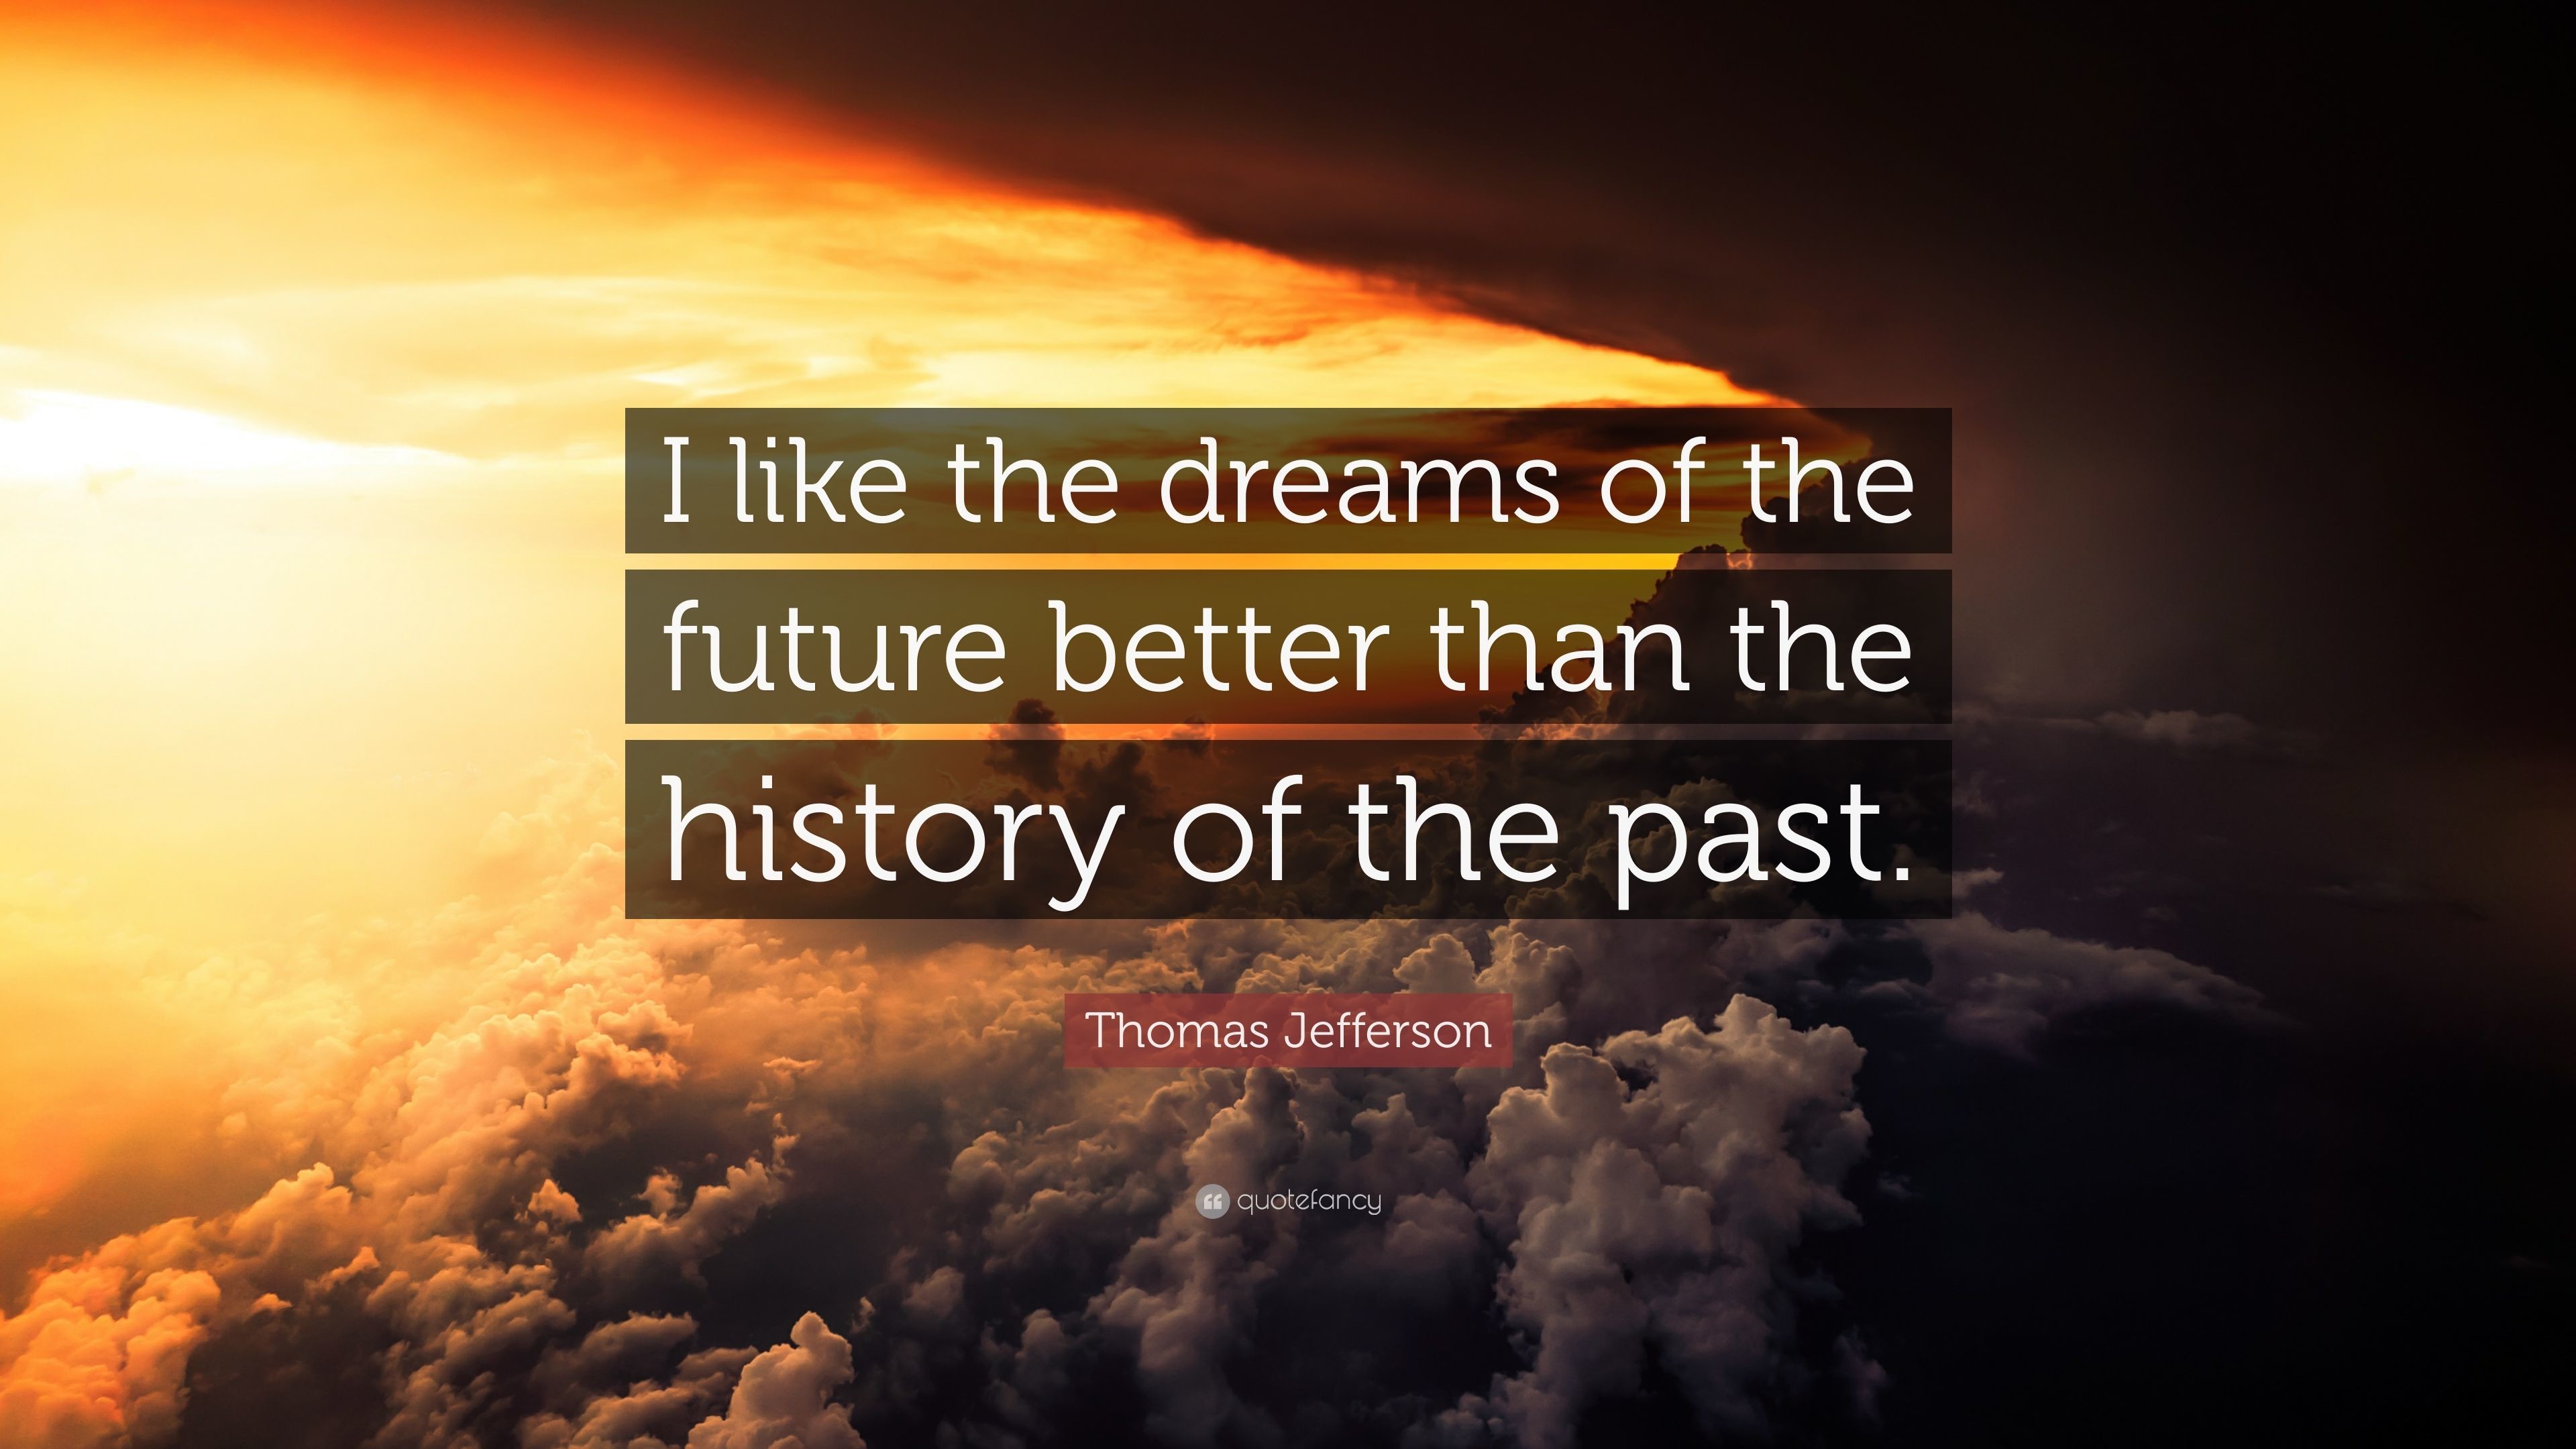 3840x2160 Thomas Jefferson Quote: “I like the dreams of the future better than the  history